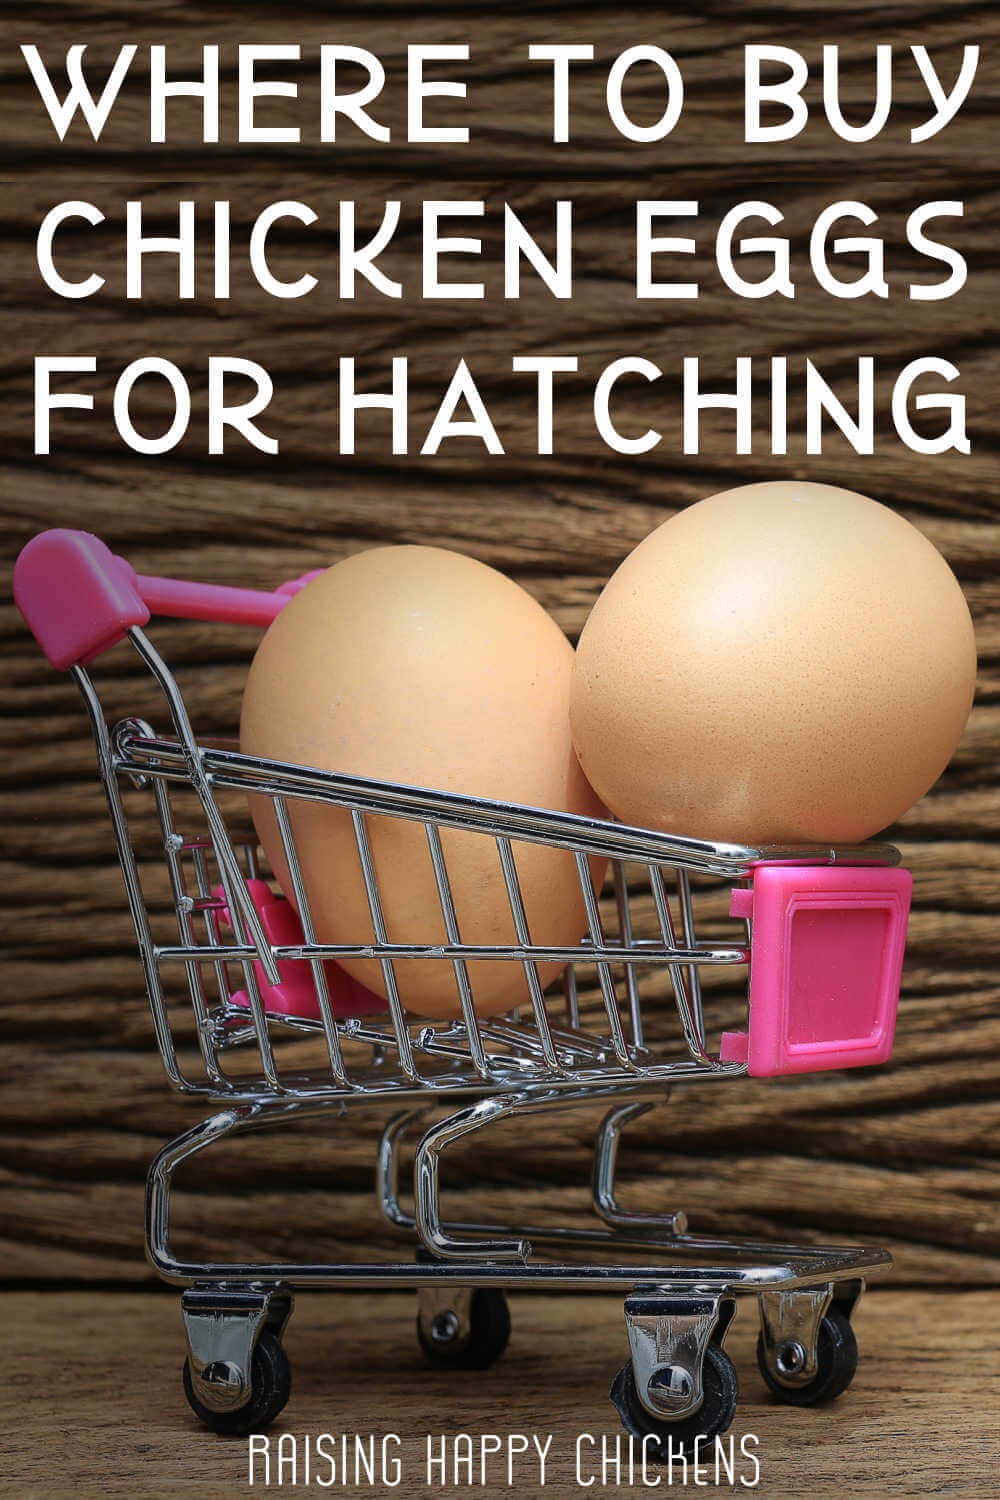 Hatching Chicken Eggs For Sale Where To Find The Best